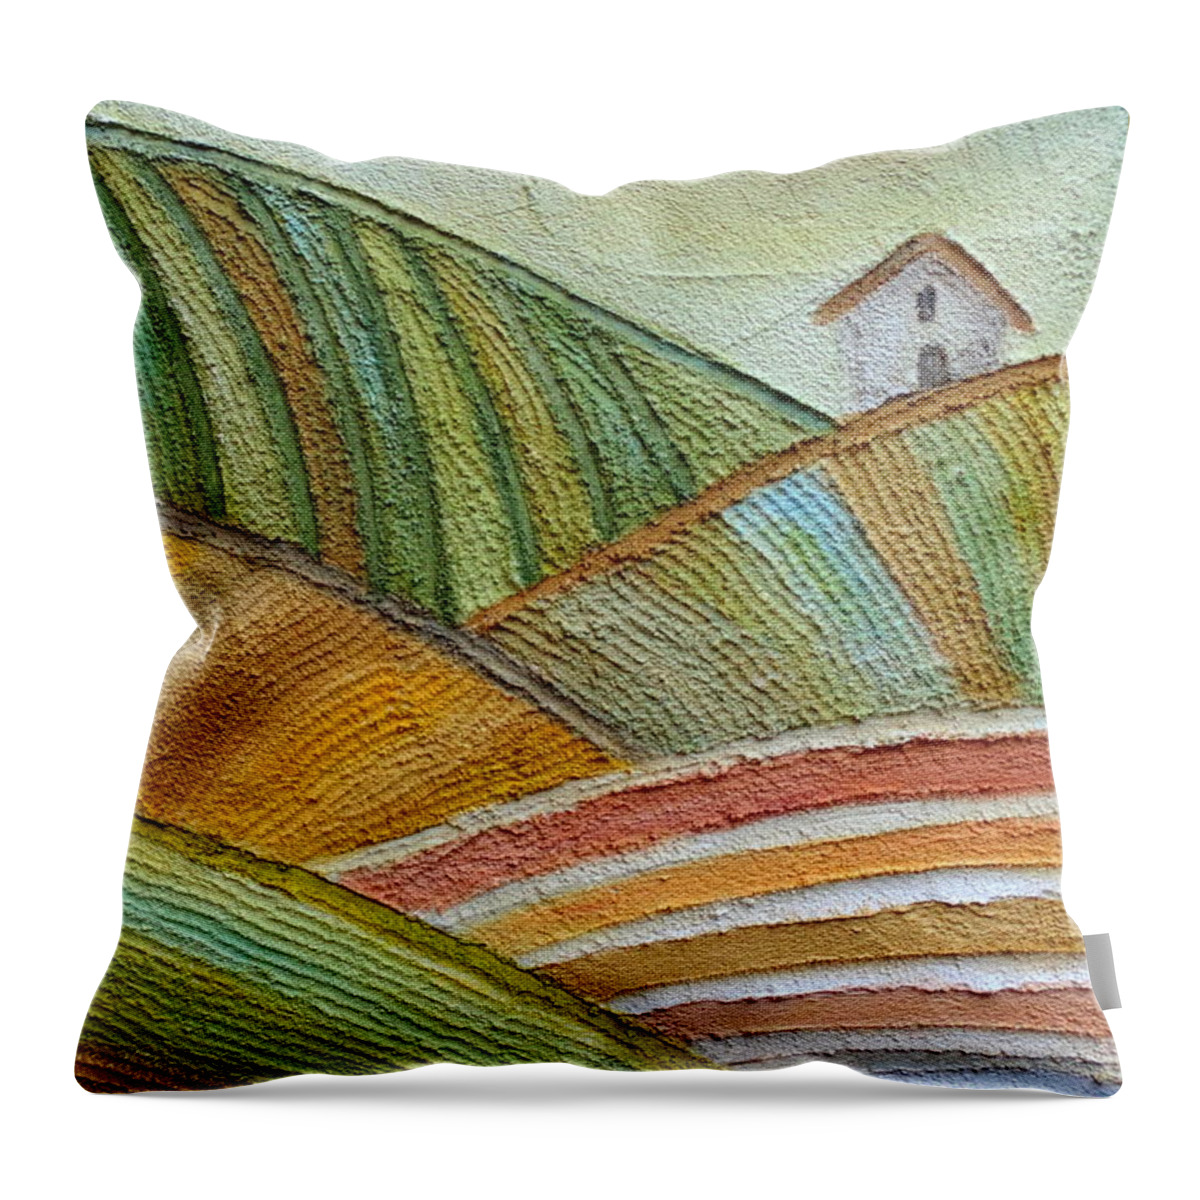 Landscape Throw Pillow featuring the painting Plowing Through by Angeles M Pomata